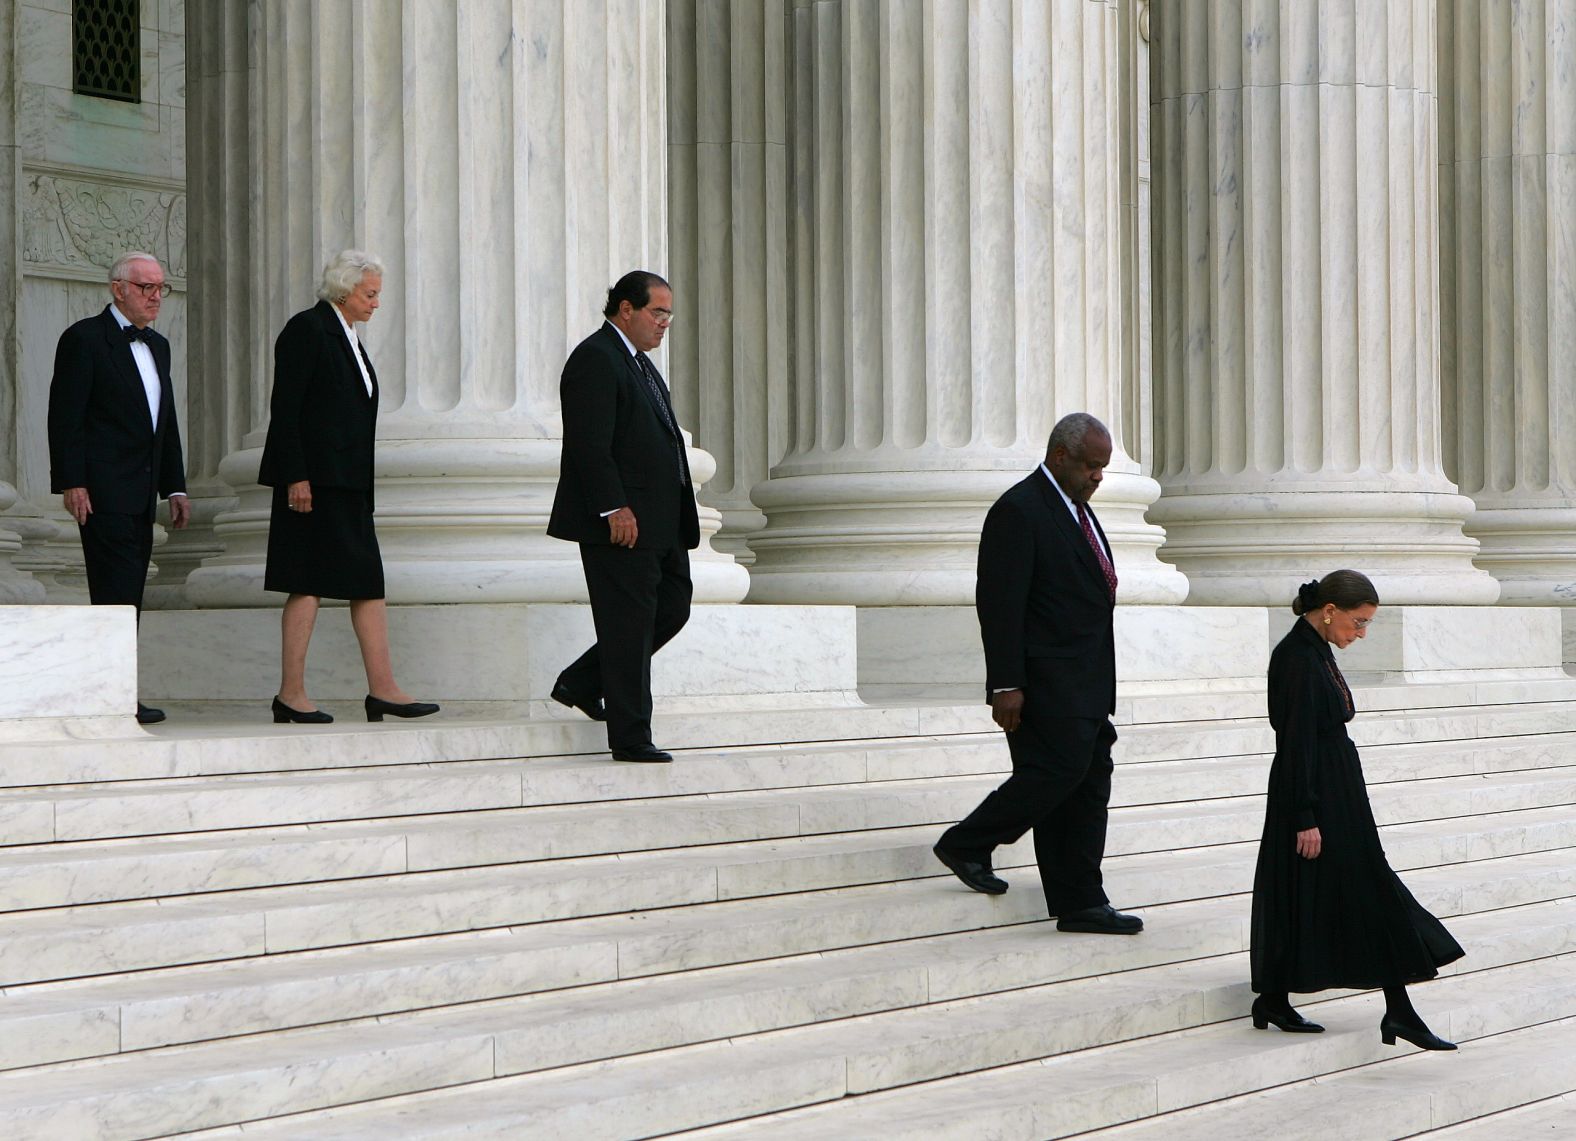 Stevens joins fellow justices on the steps of the Supreme Court on September 6, 2005, during ceremonies honoring Chief Justice William Rehnquist after his death. From left are Stevens, Sandra Day O'Connor, Antonin Scalia, Clarence Thomas and Ruth Bader Ginsburg. 